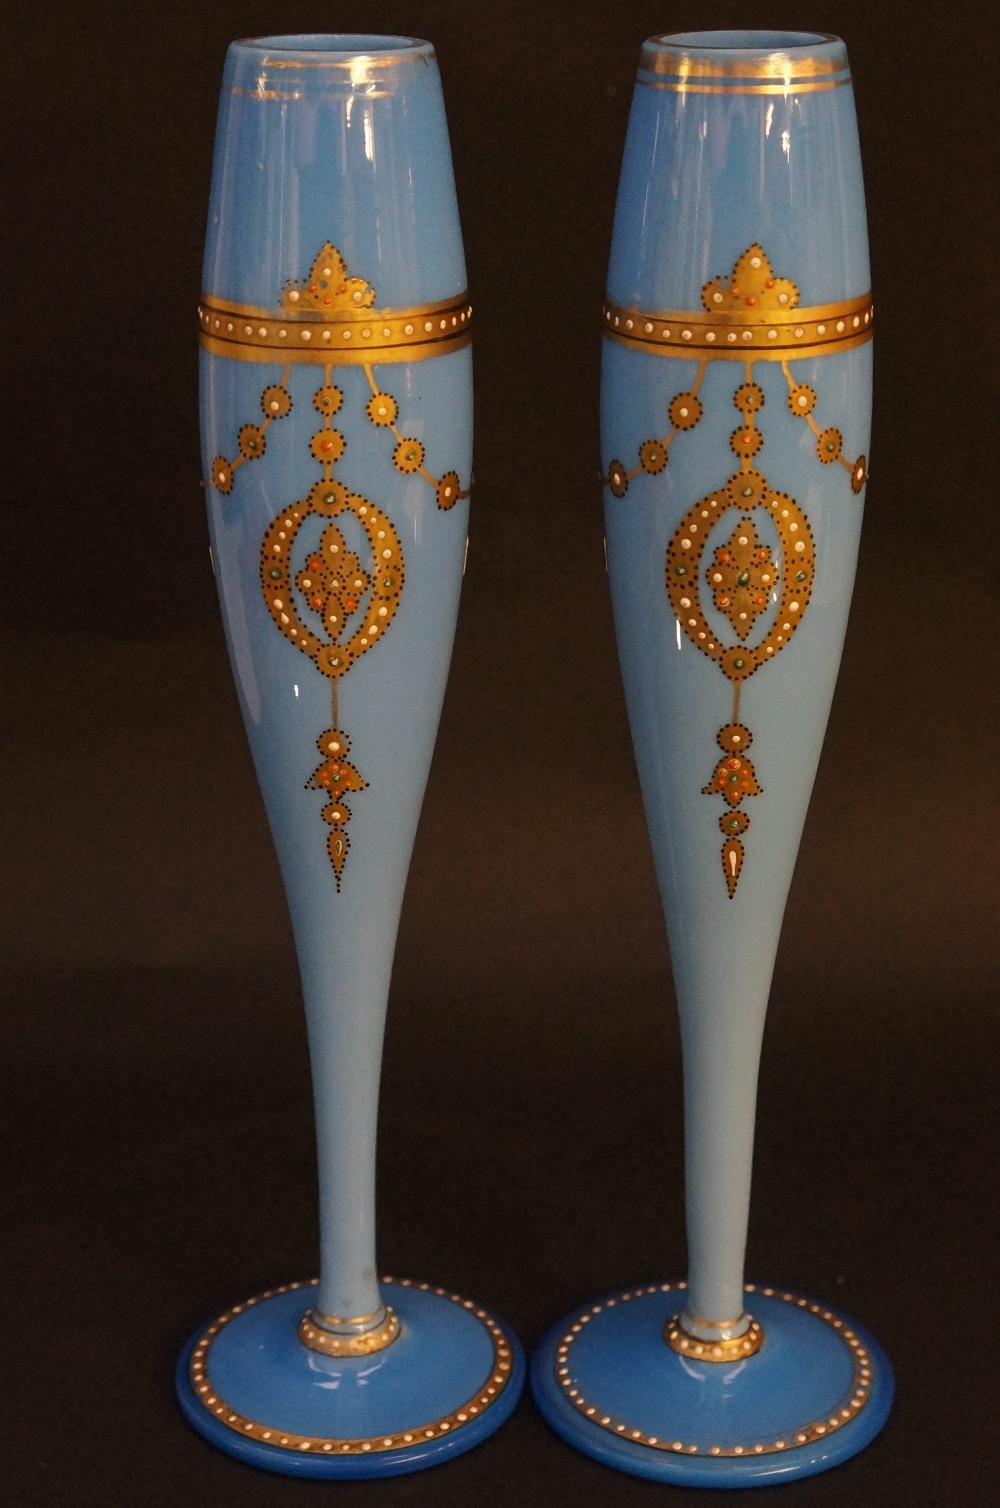 A pair of slender opaque blue glass vases, gilded pendant drapes embellished with white,